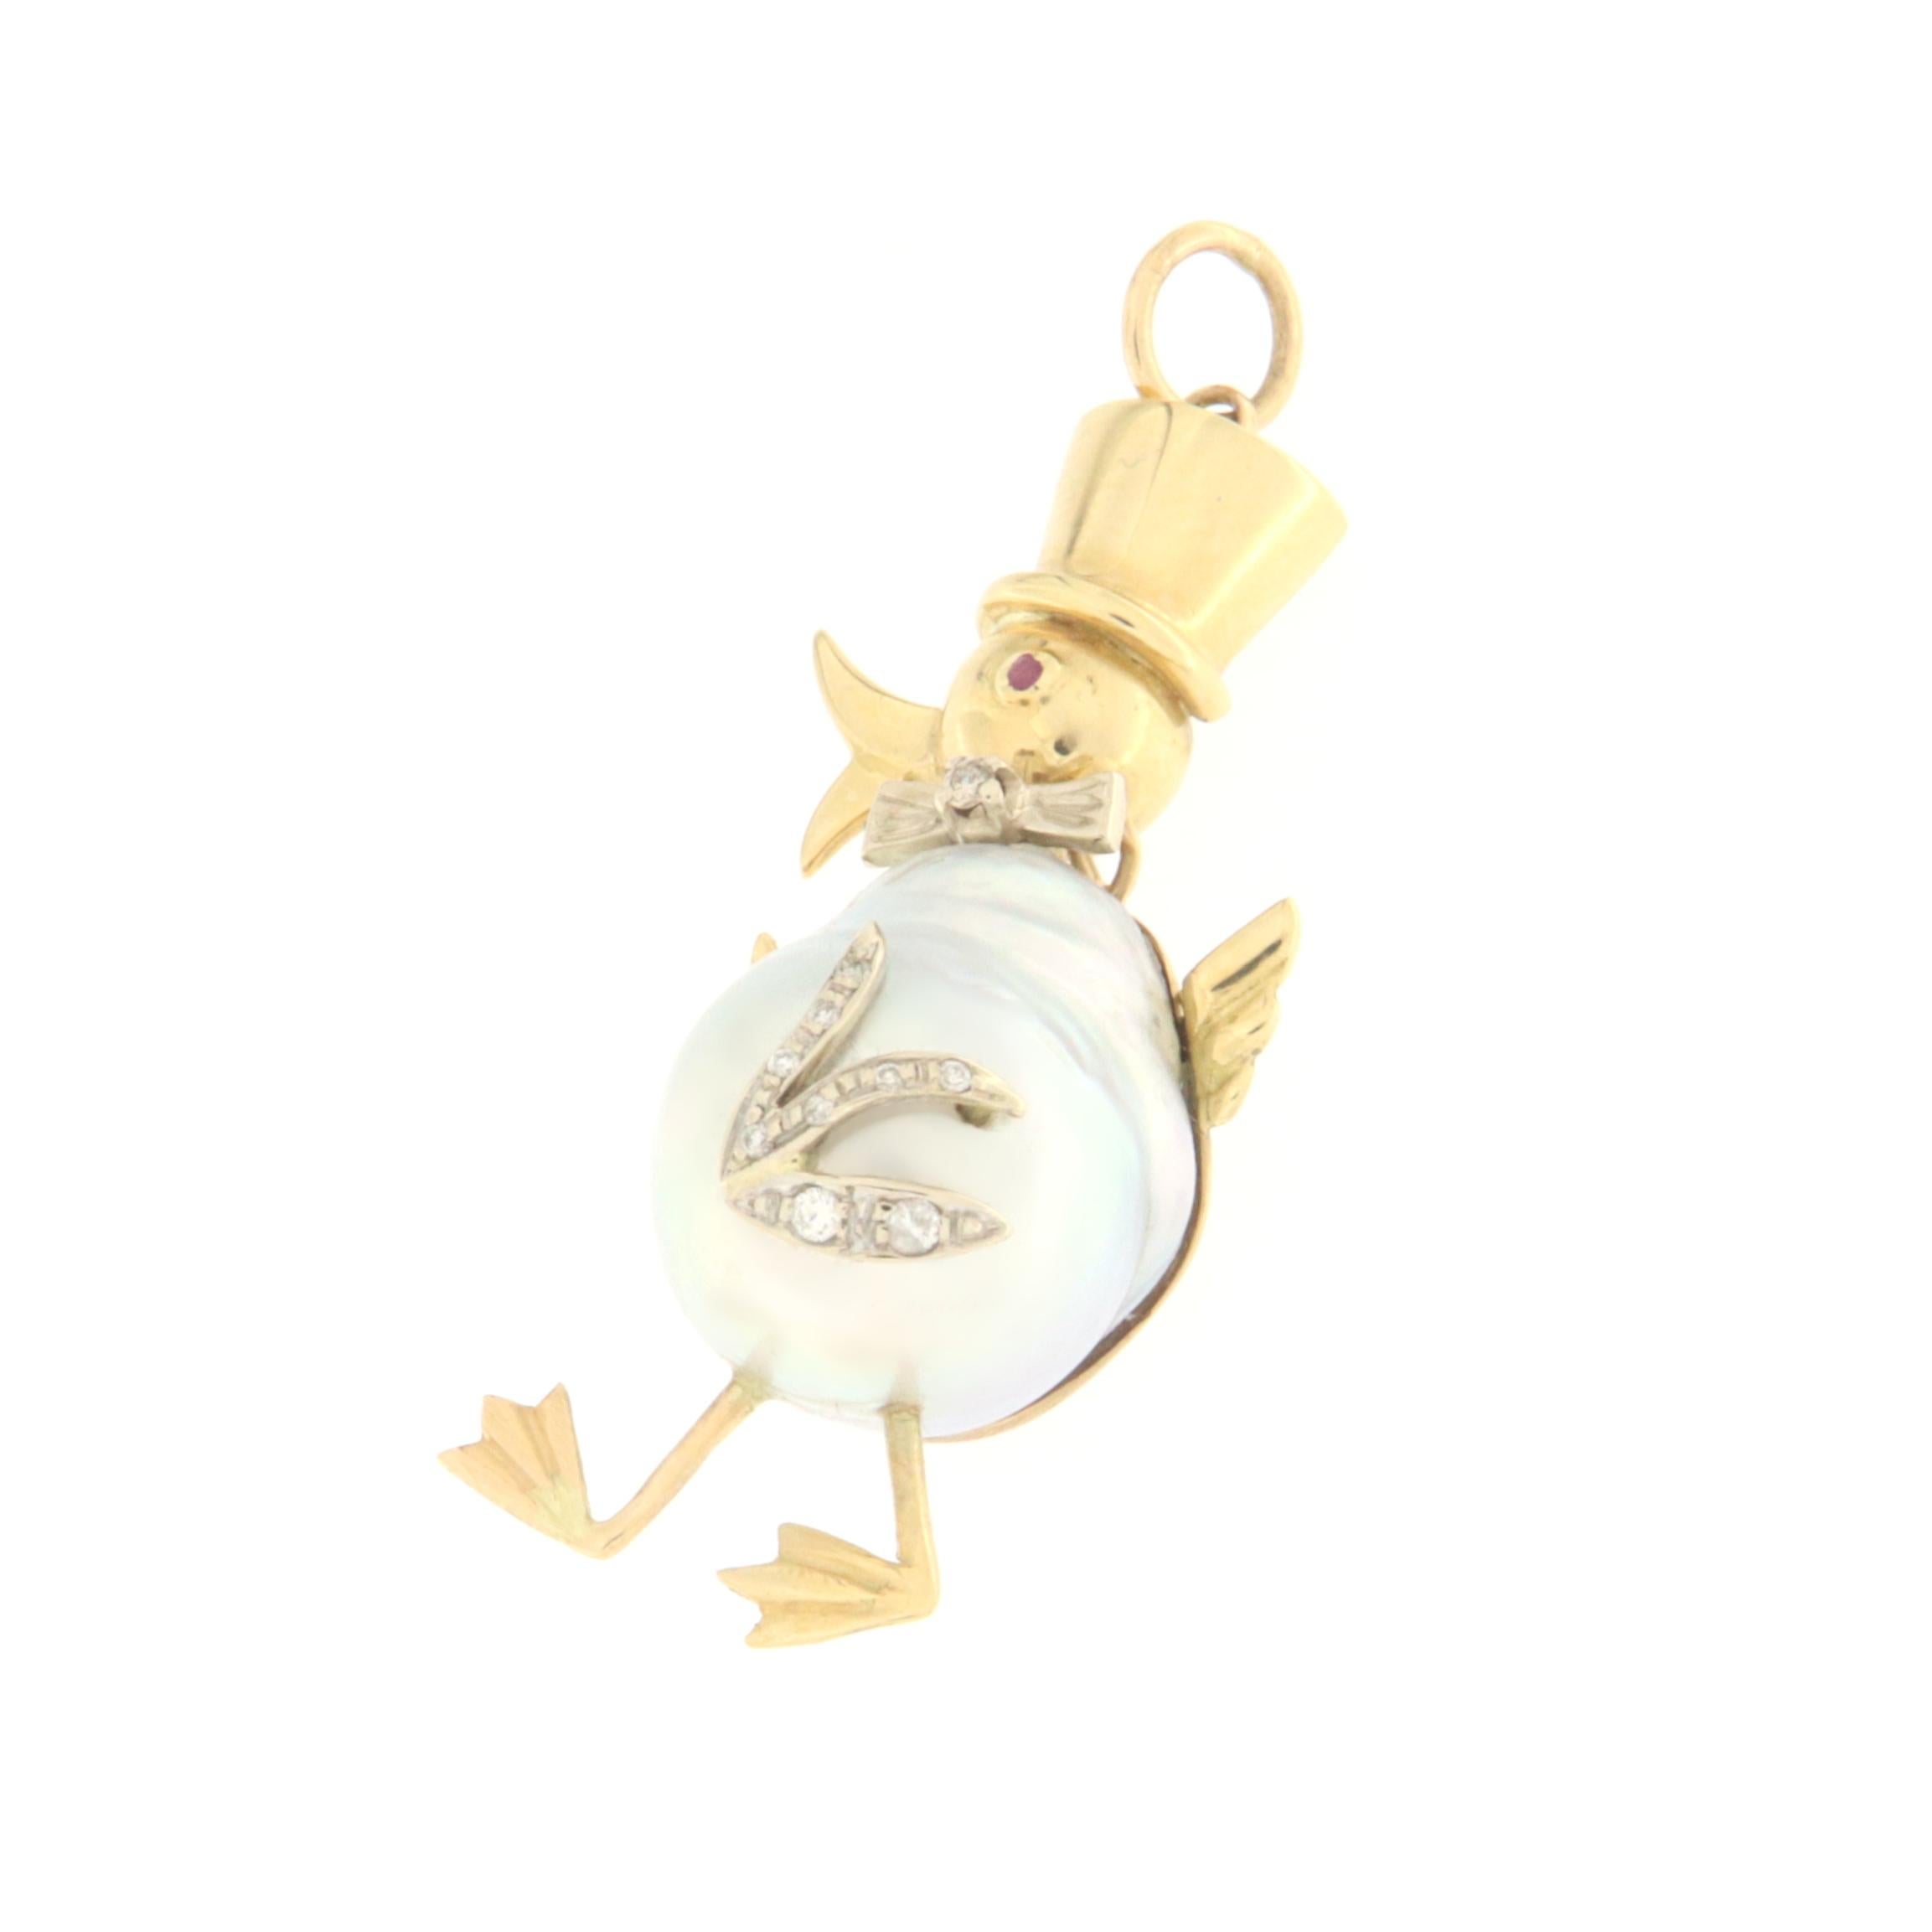 This enchanting pendant features a duck, exquisitely crafted in 18-karat white and yellow gold, combining the elegance of design with the vivacity and charm of nature. The body of the duck is beautifully represented by a cultured natural pearl,